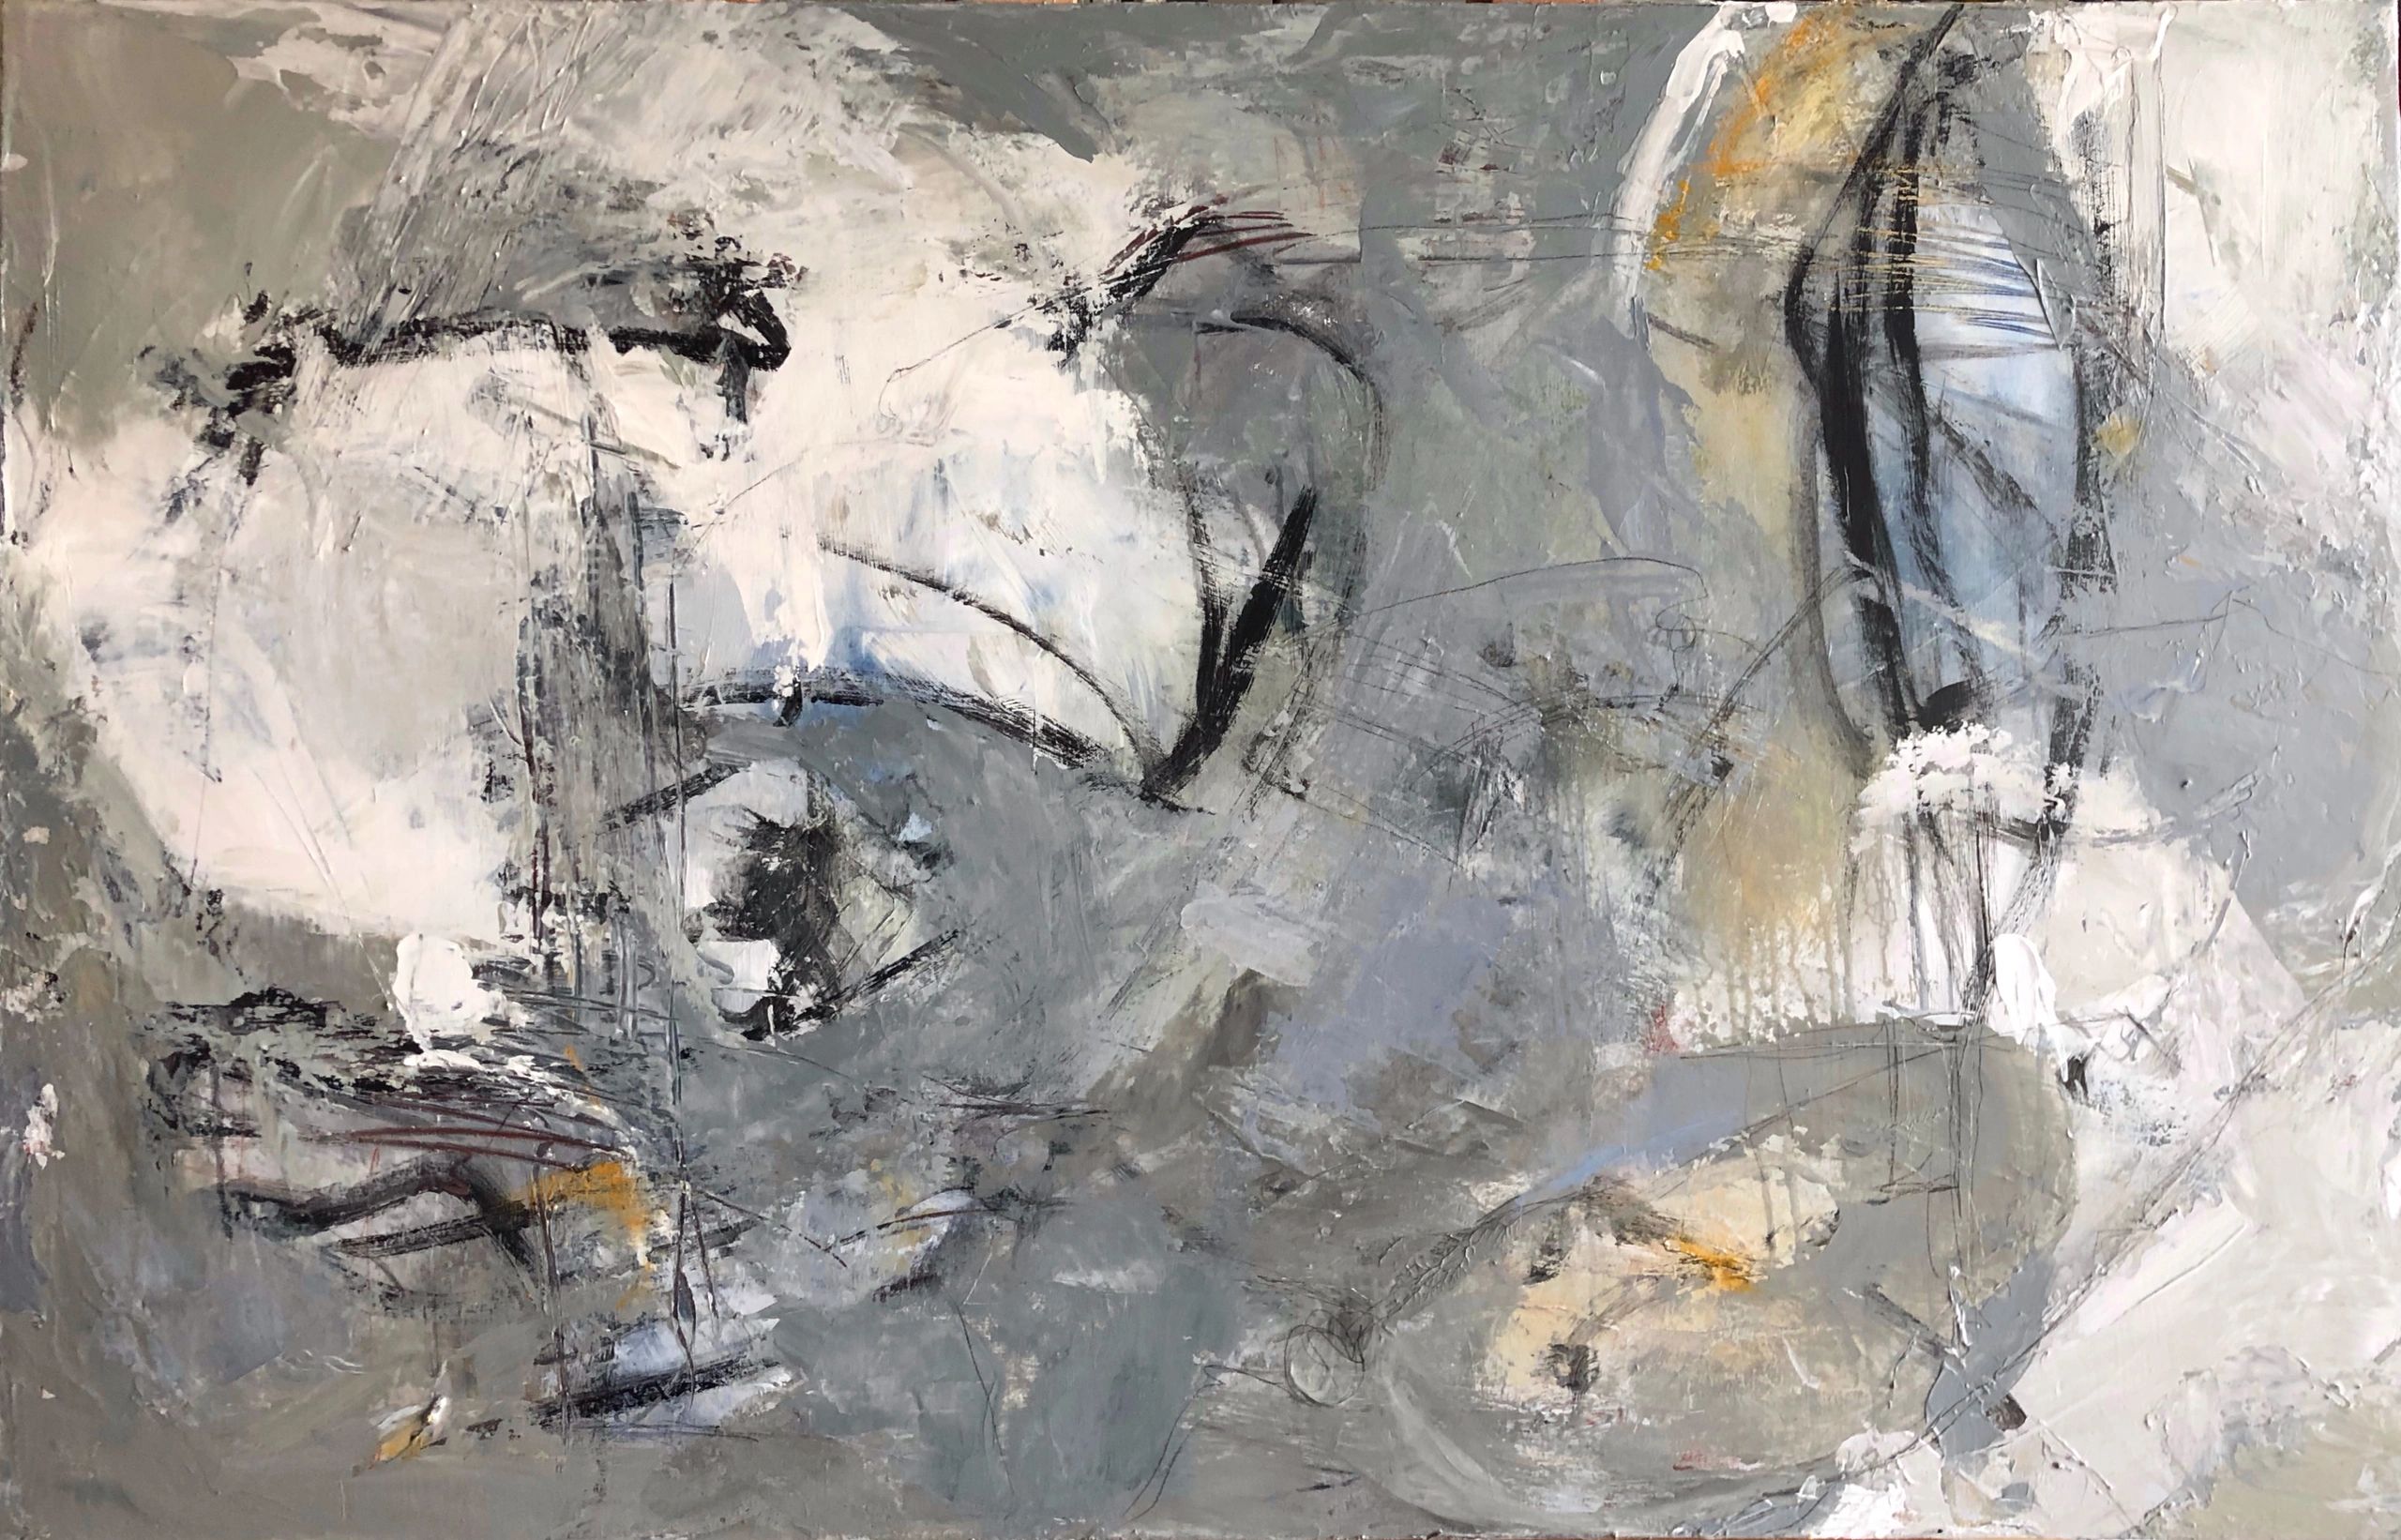 Original abstract artwork in neutral colors, primarily grey